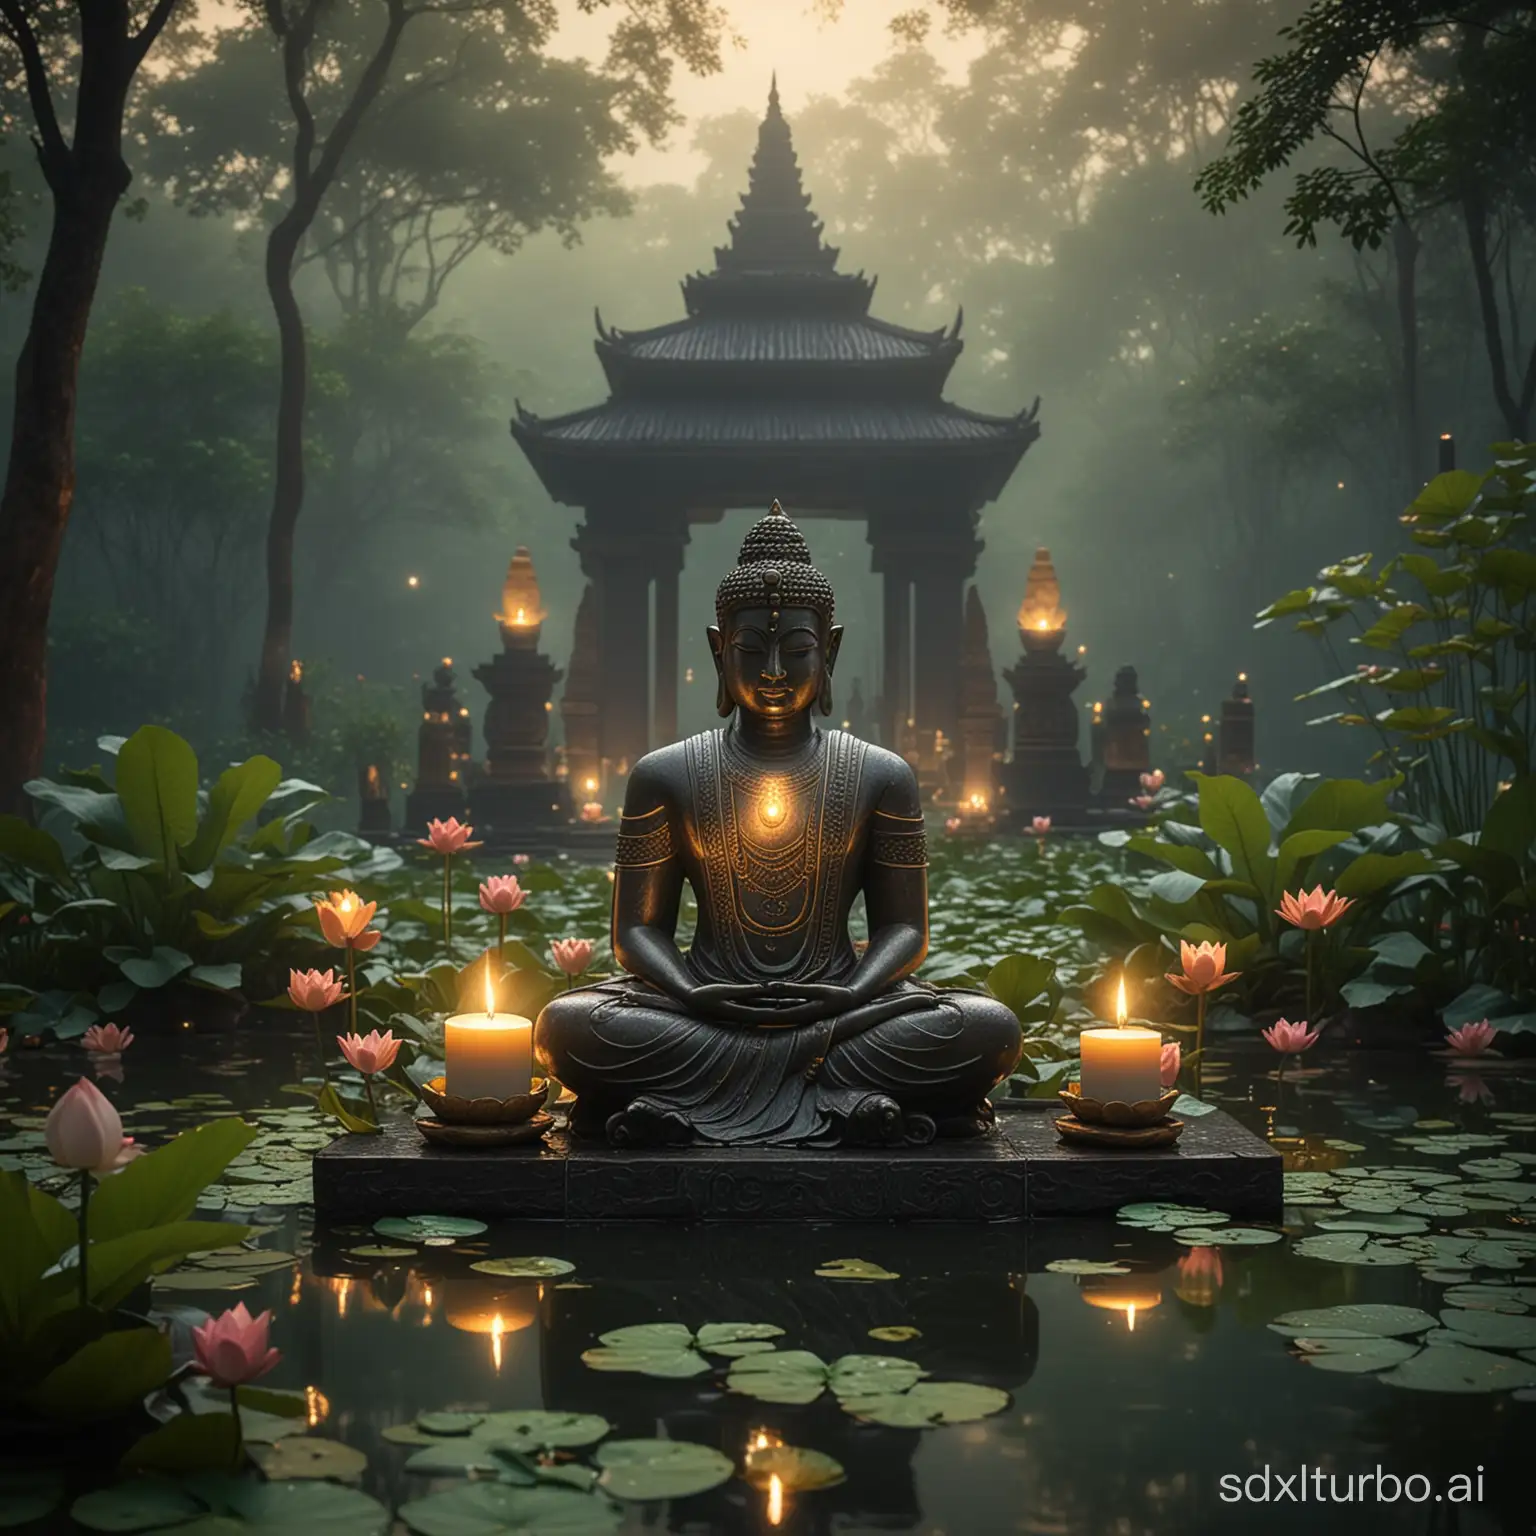 a photorealistic, dramatic mystic light, detailed, bokeh, mist, inspiring, tranquil, symmetric, temple backyard, bronze Osiris statue, meditation space lush with green vegetation and water flowing in the middle, blooming lotus on the water, night time, candle lights, warm and inviting, the image is symmetric